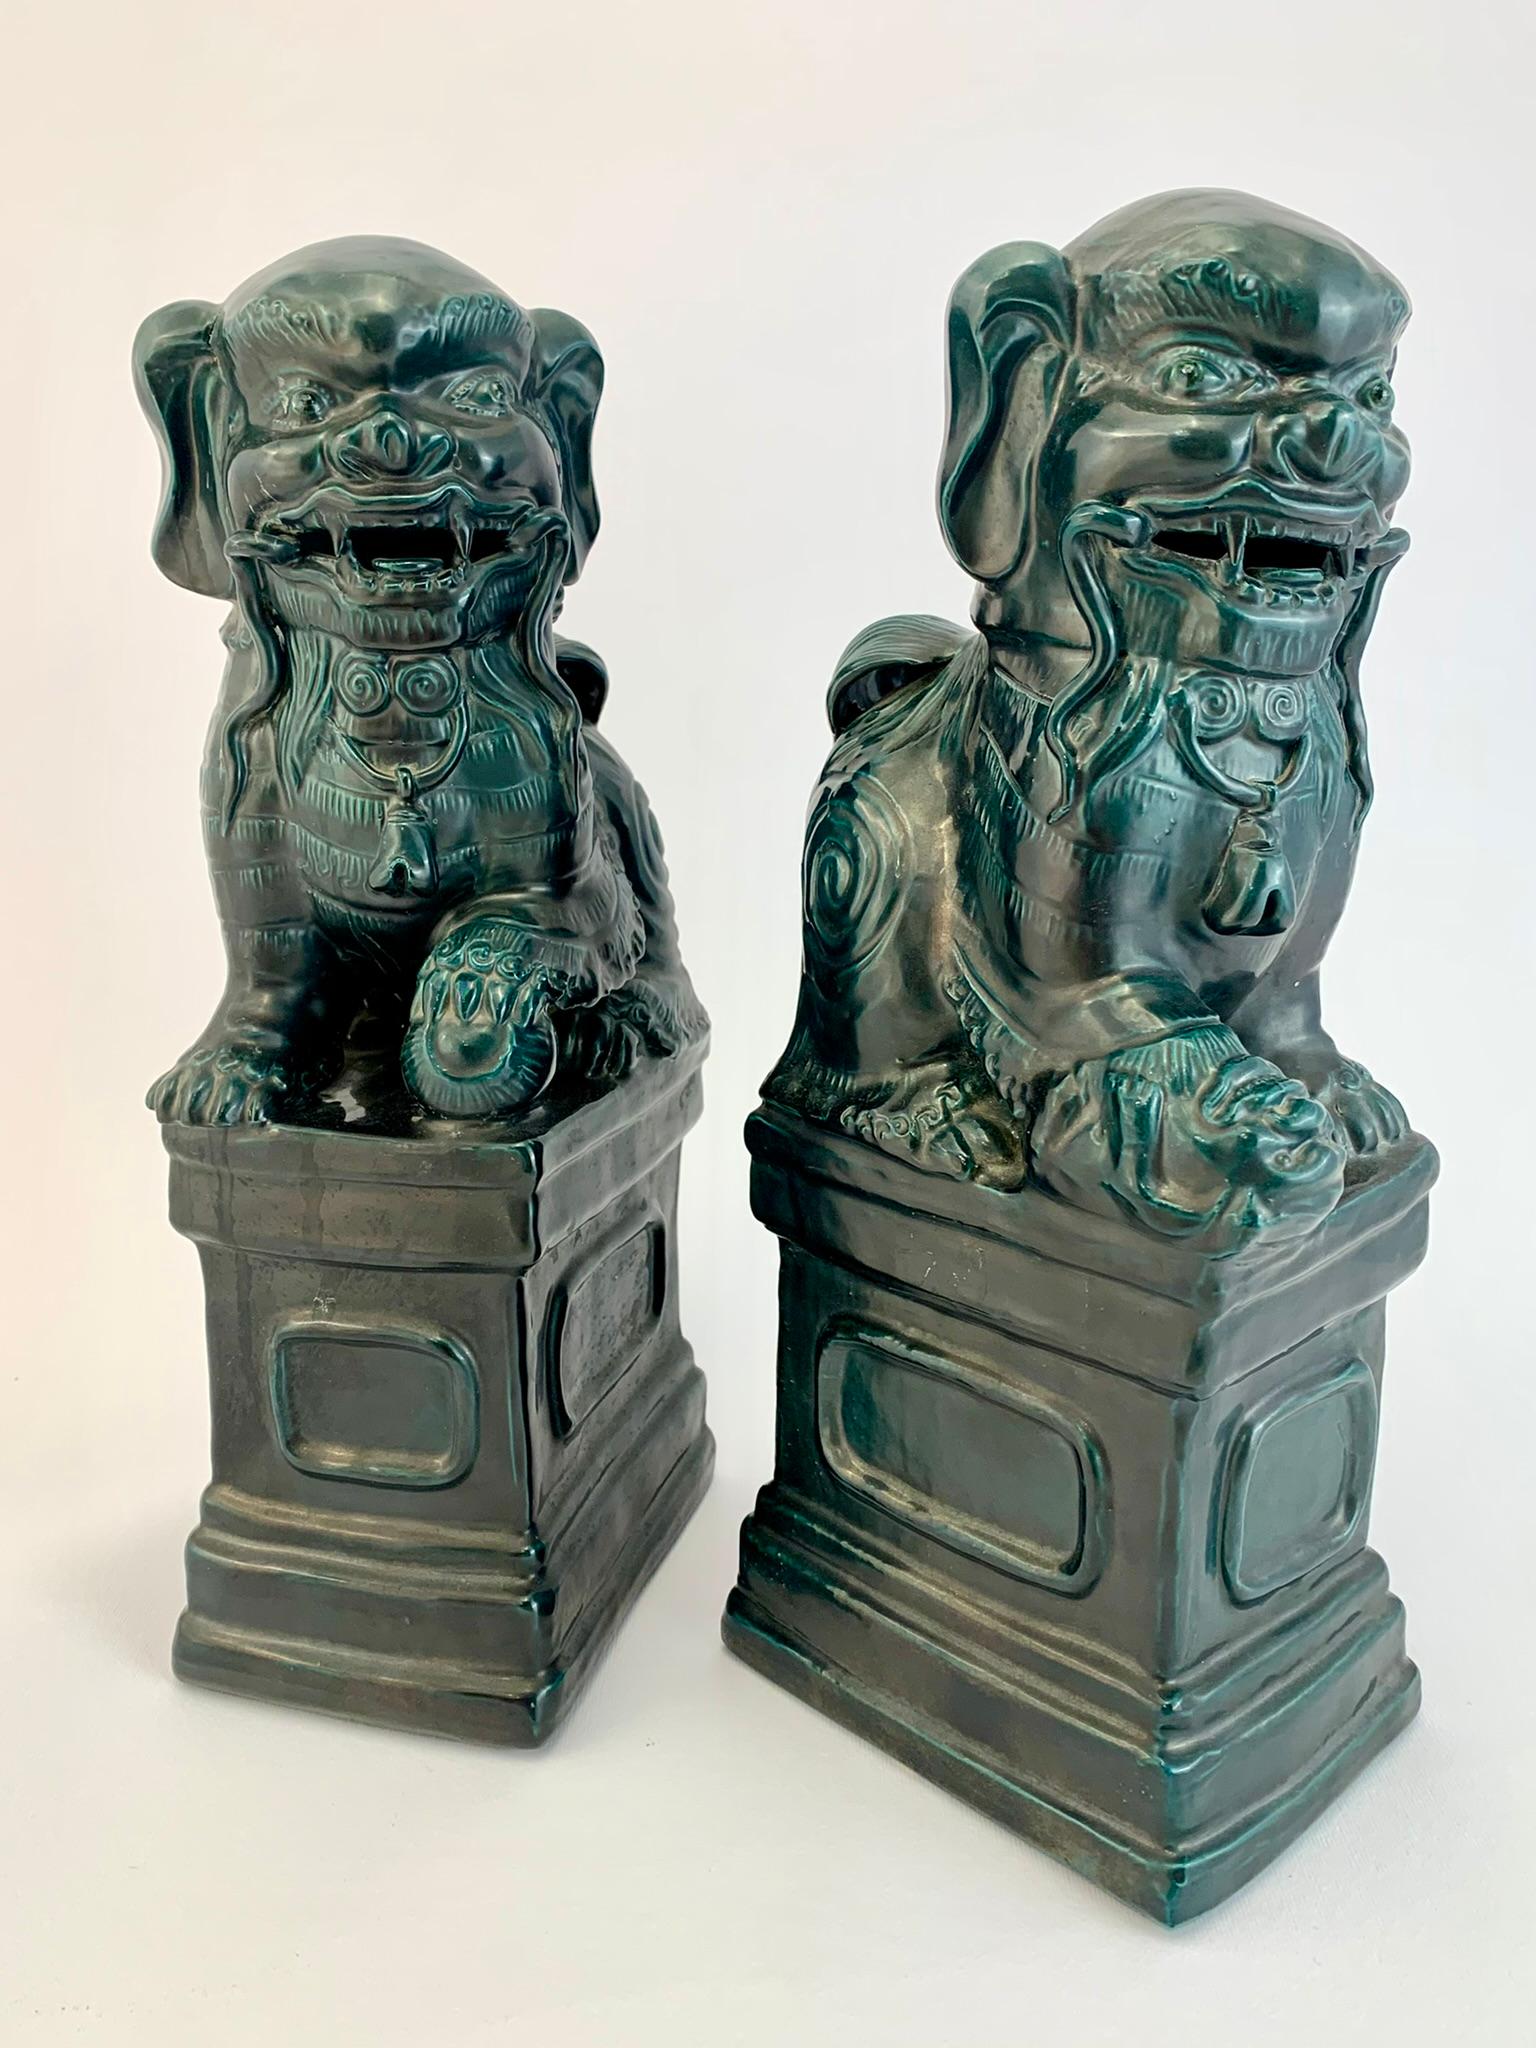 Beautiful pair of Pho dogs in turquoise glazed ceramic, on plinth bases.
Oriental manufacture from the first half of the 20th century.